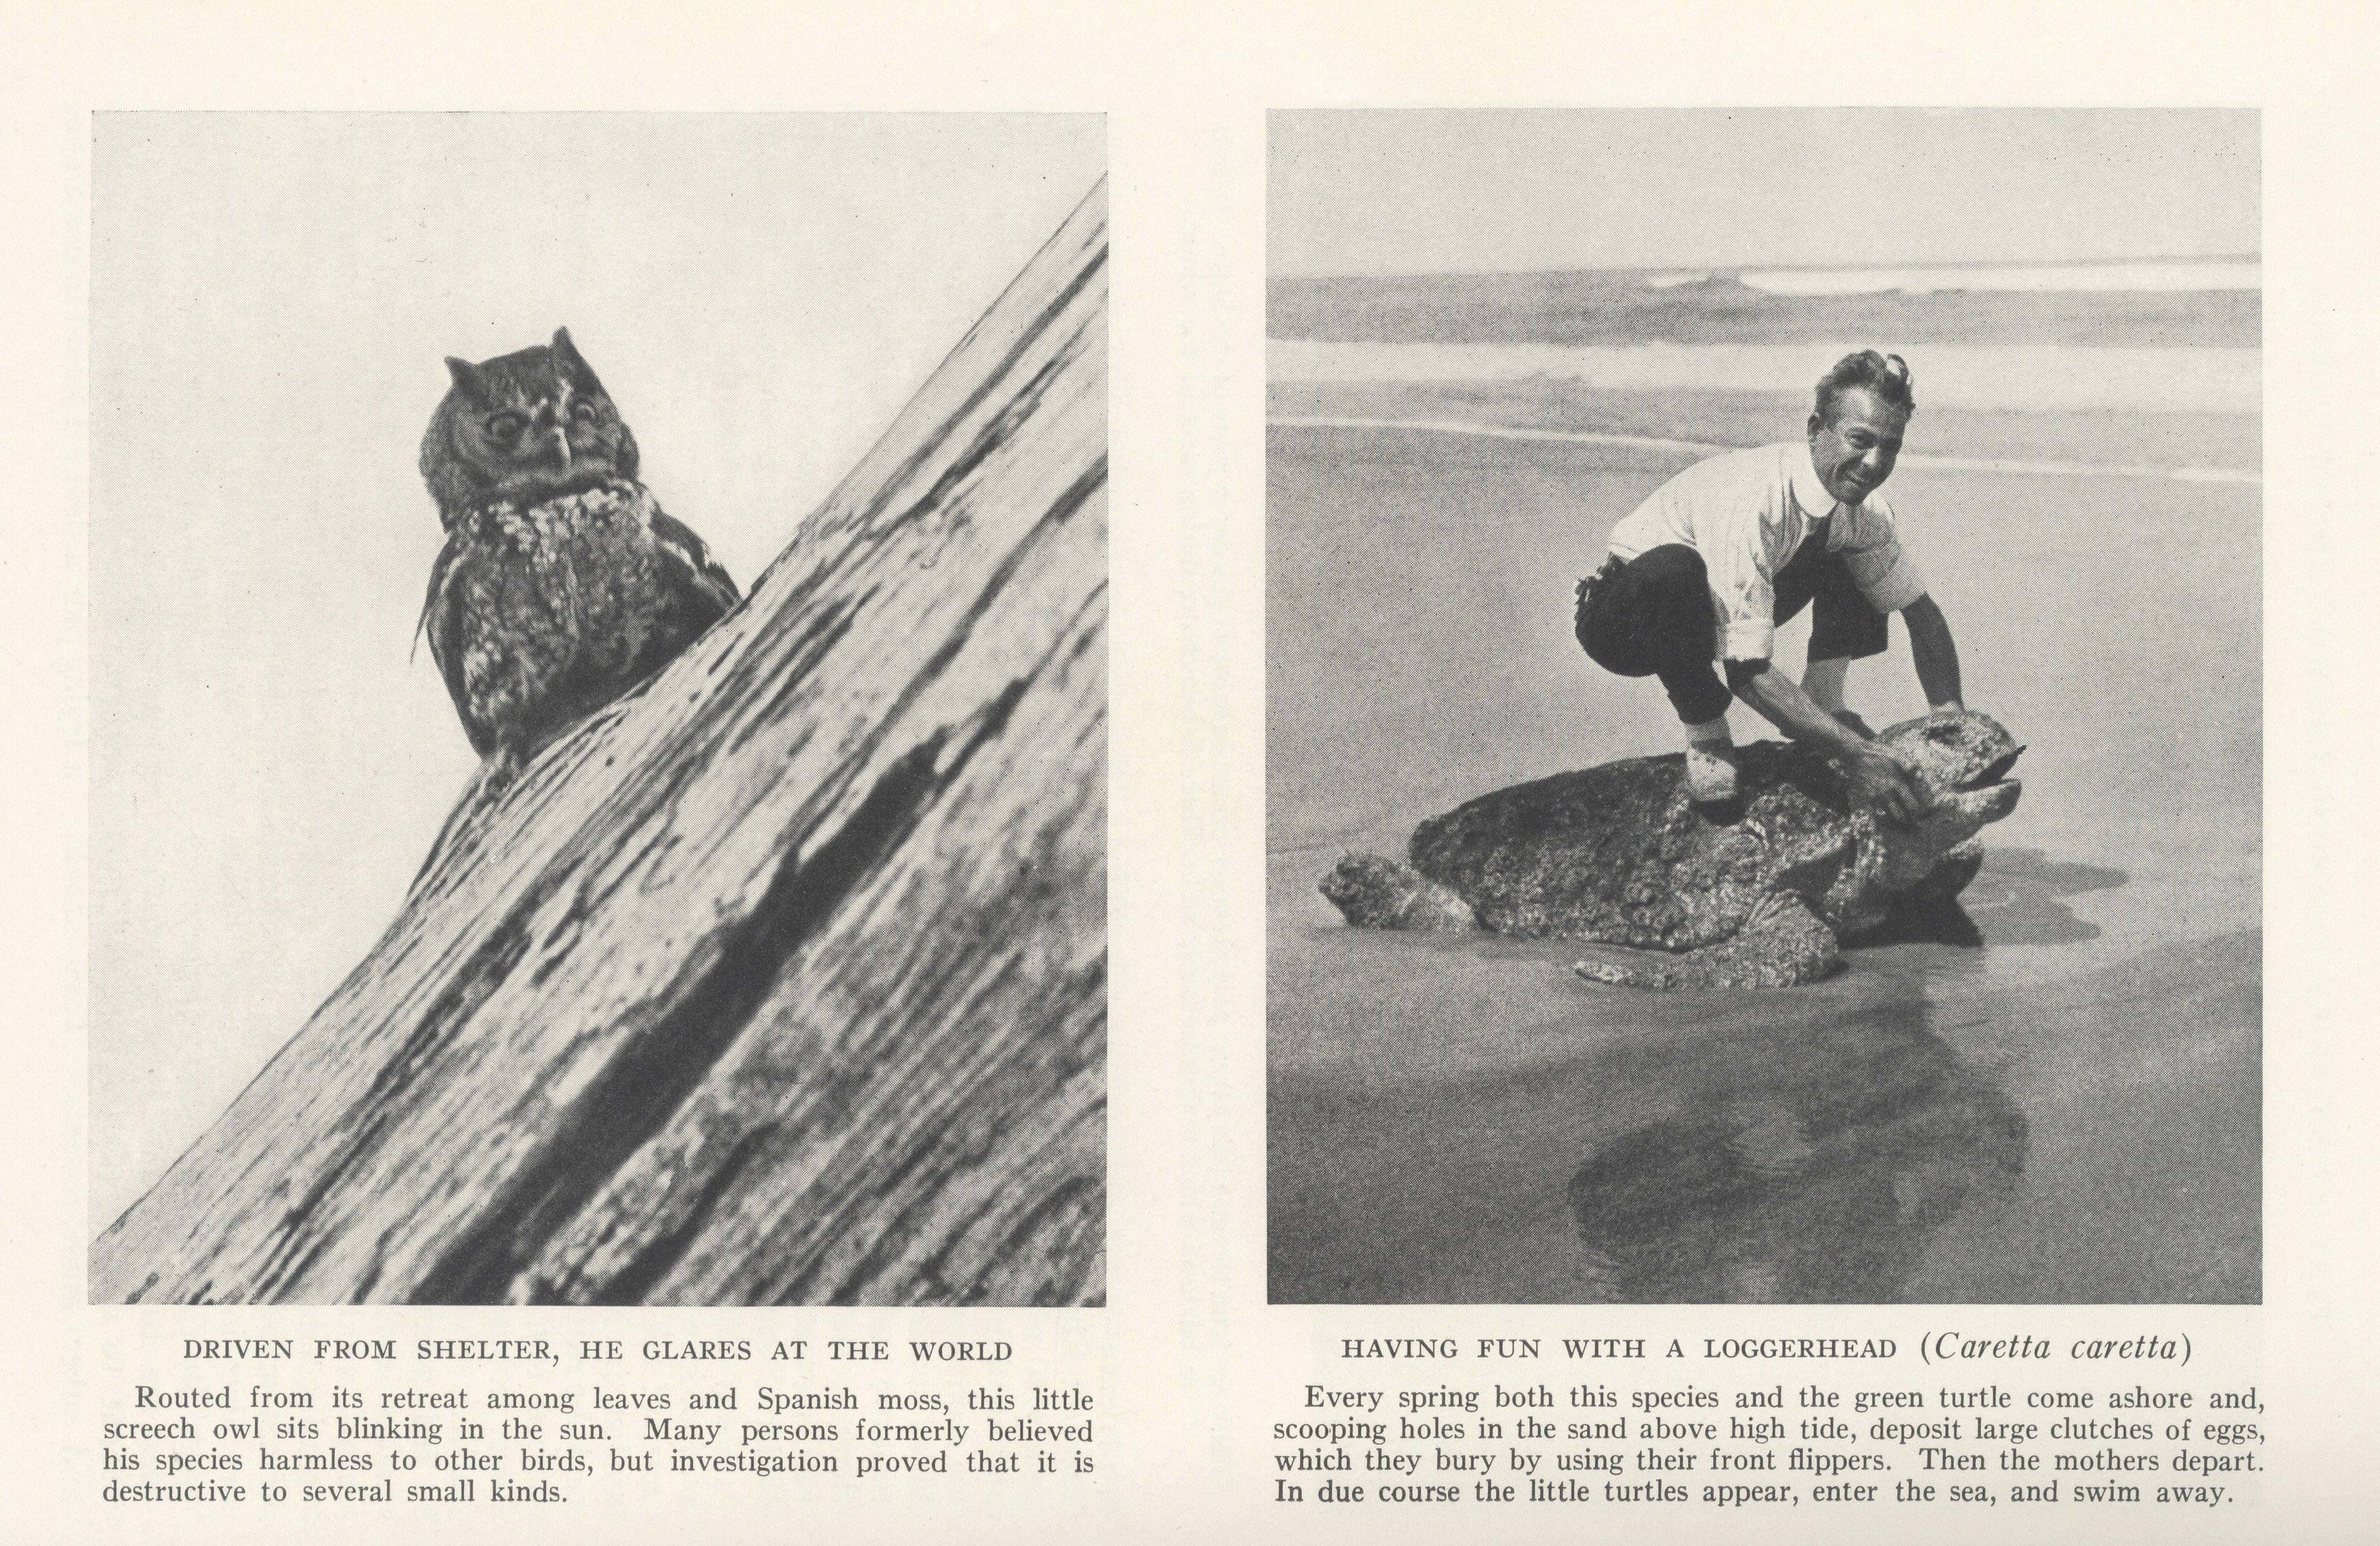 George Shiras 3rd :: Little screech owl. Published in Hunting wild life with camera and flashlight : a record of sixty-five years’ visits to the woods and waters of North America. Volume II, National Geographic Society, 1935. | src Memorial University of Newfoundland